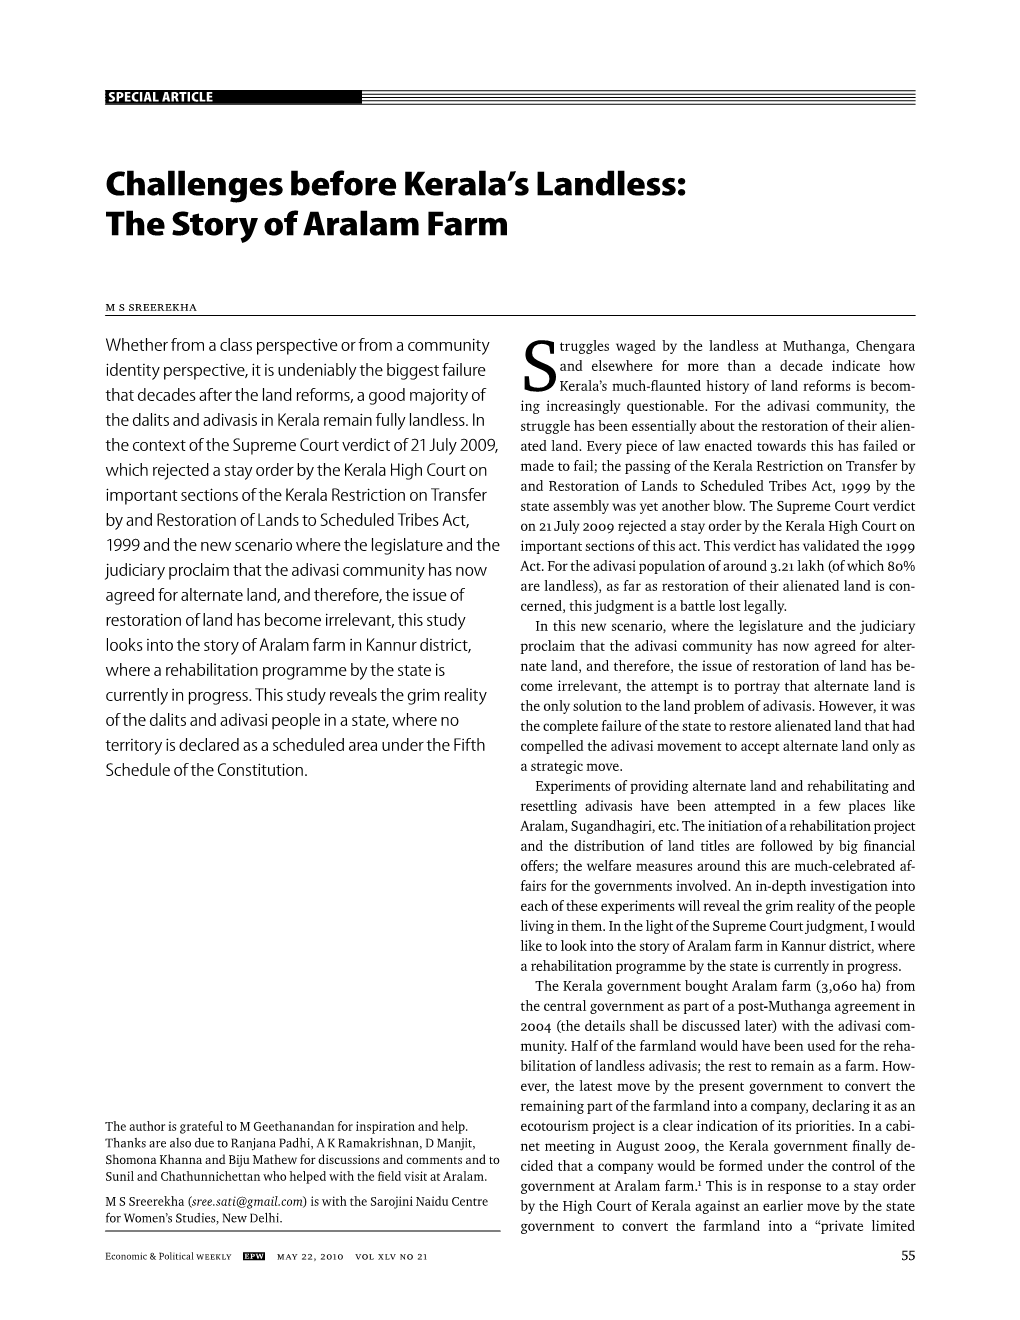 Challenges Before Kerala's Landless: the Story of Aralam Farm